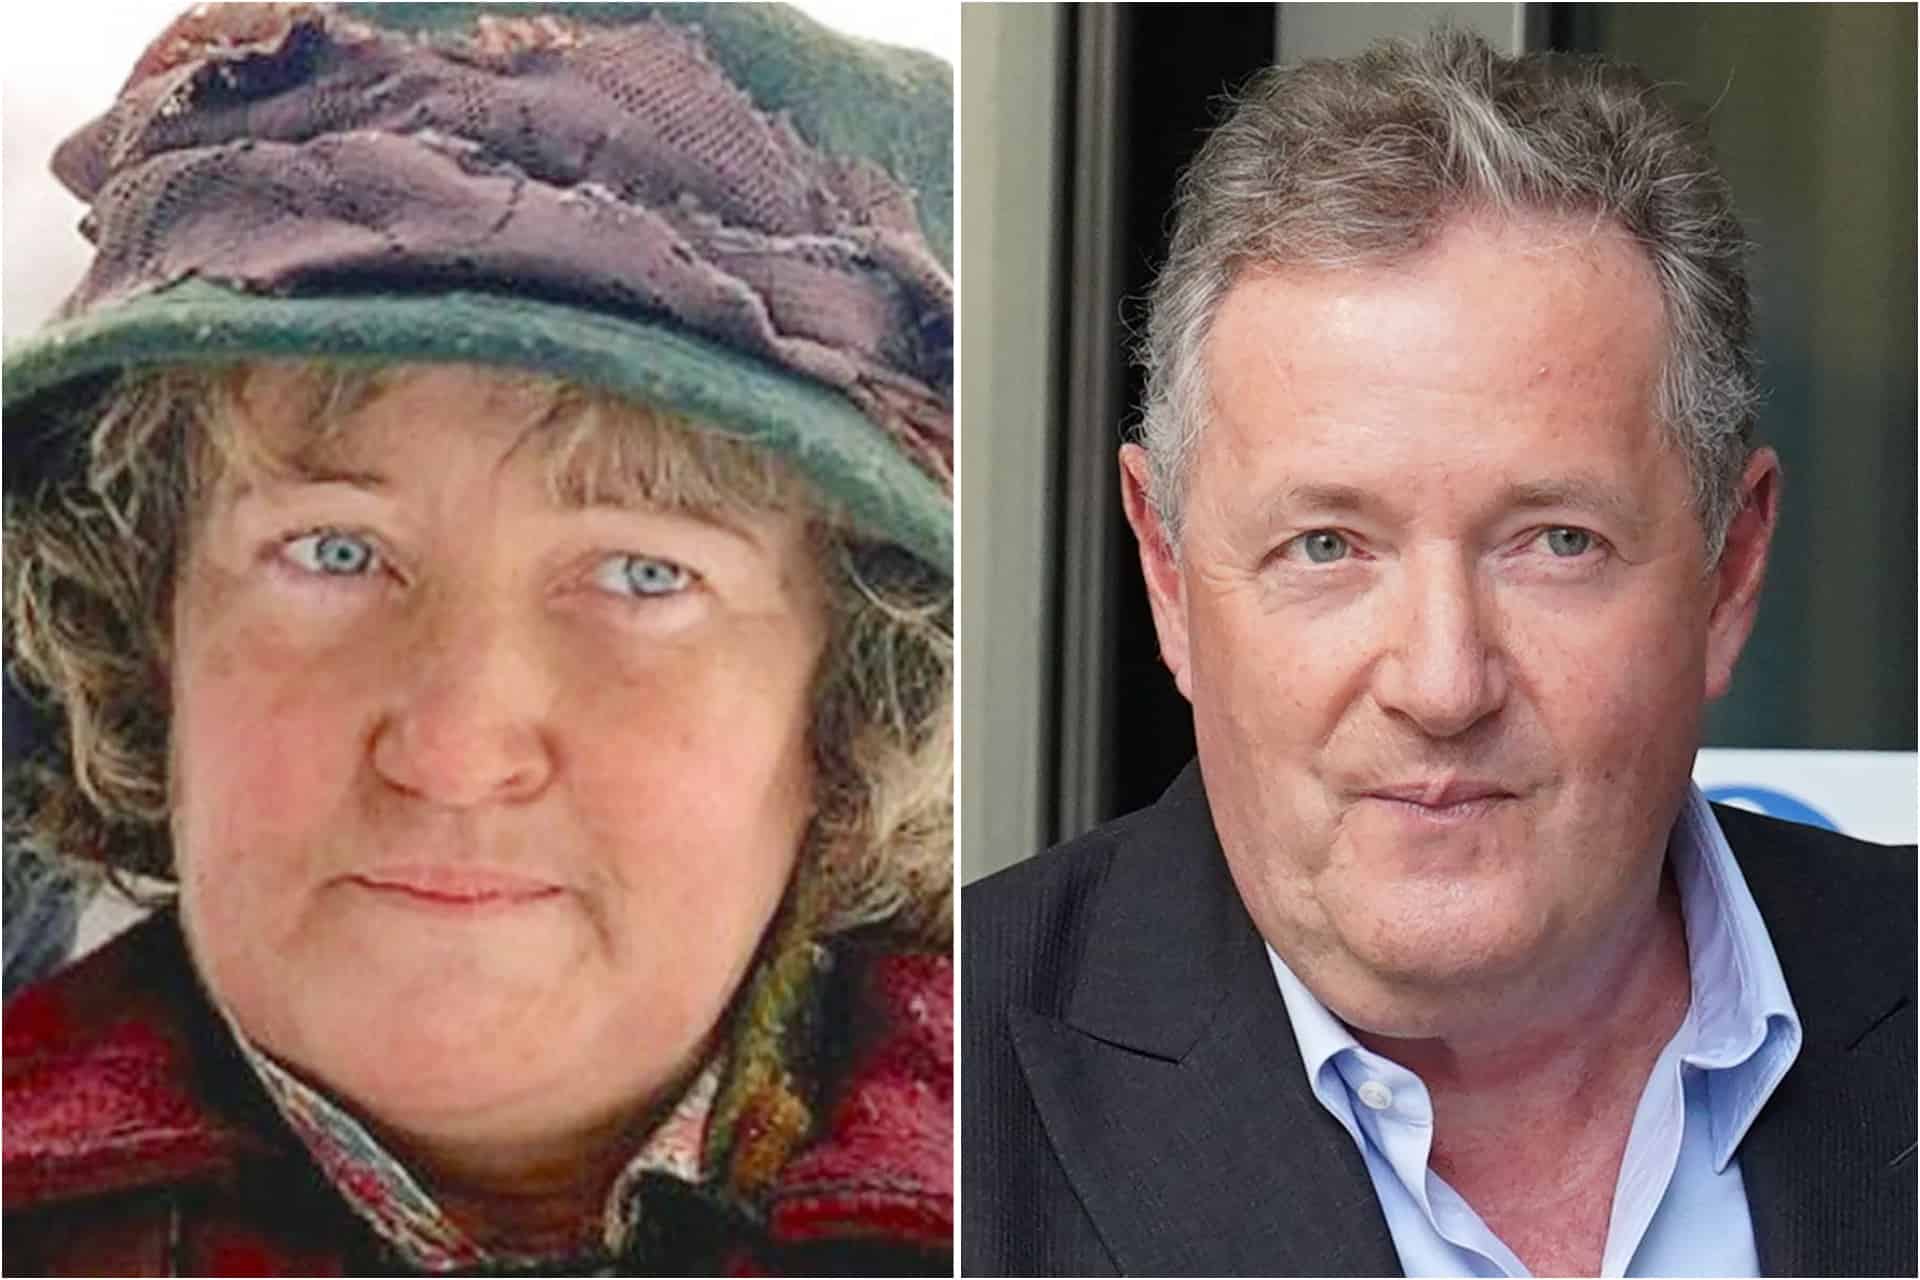 Piers Morgan responds to suggestions he is Pigeon Lady in Home Alone